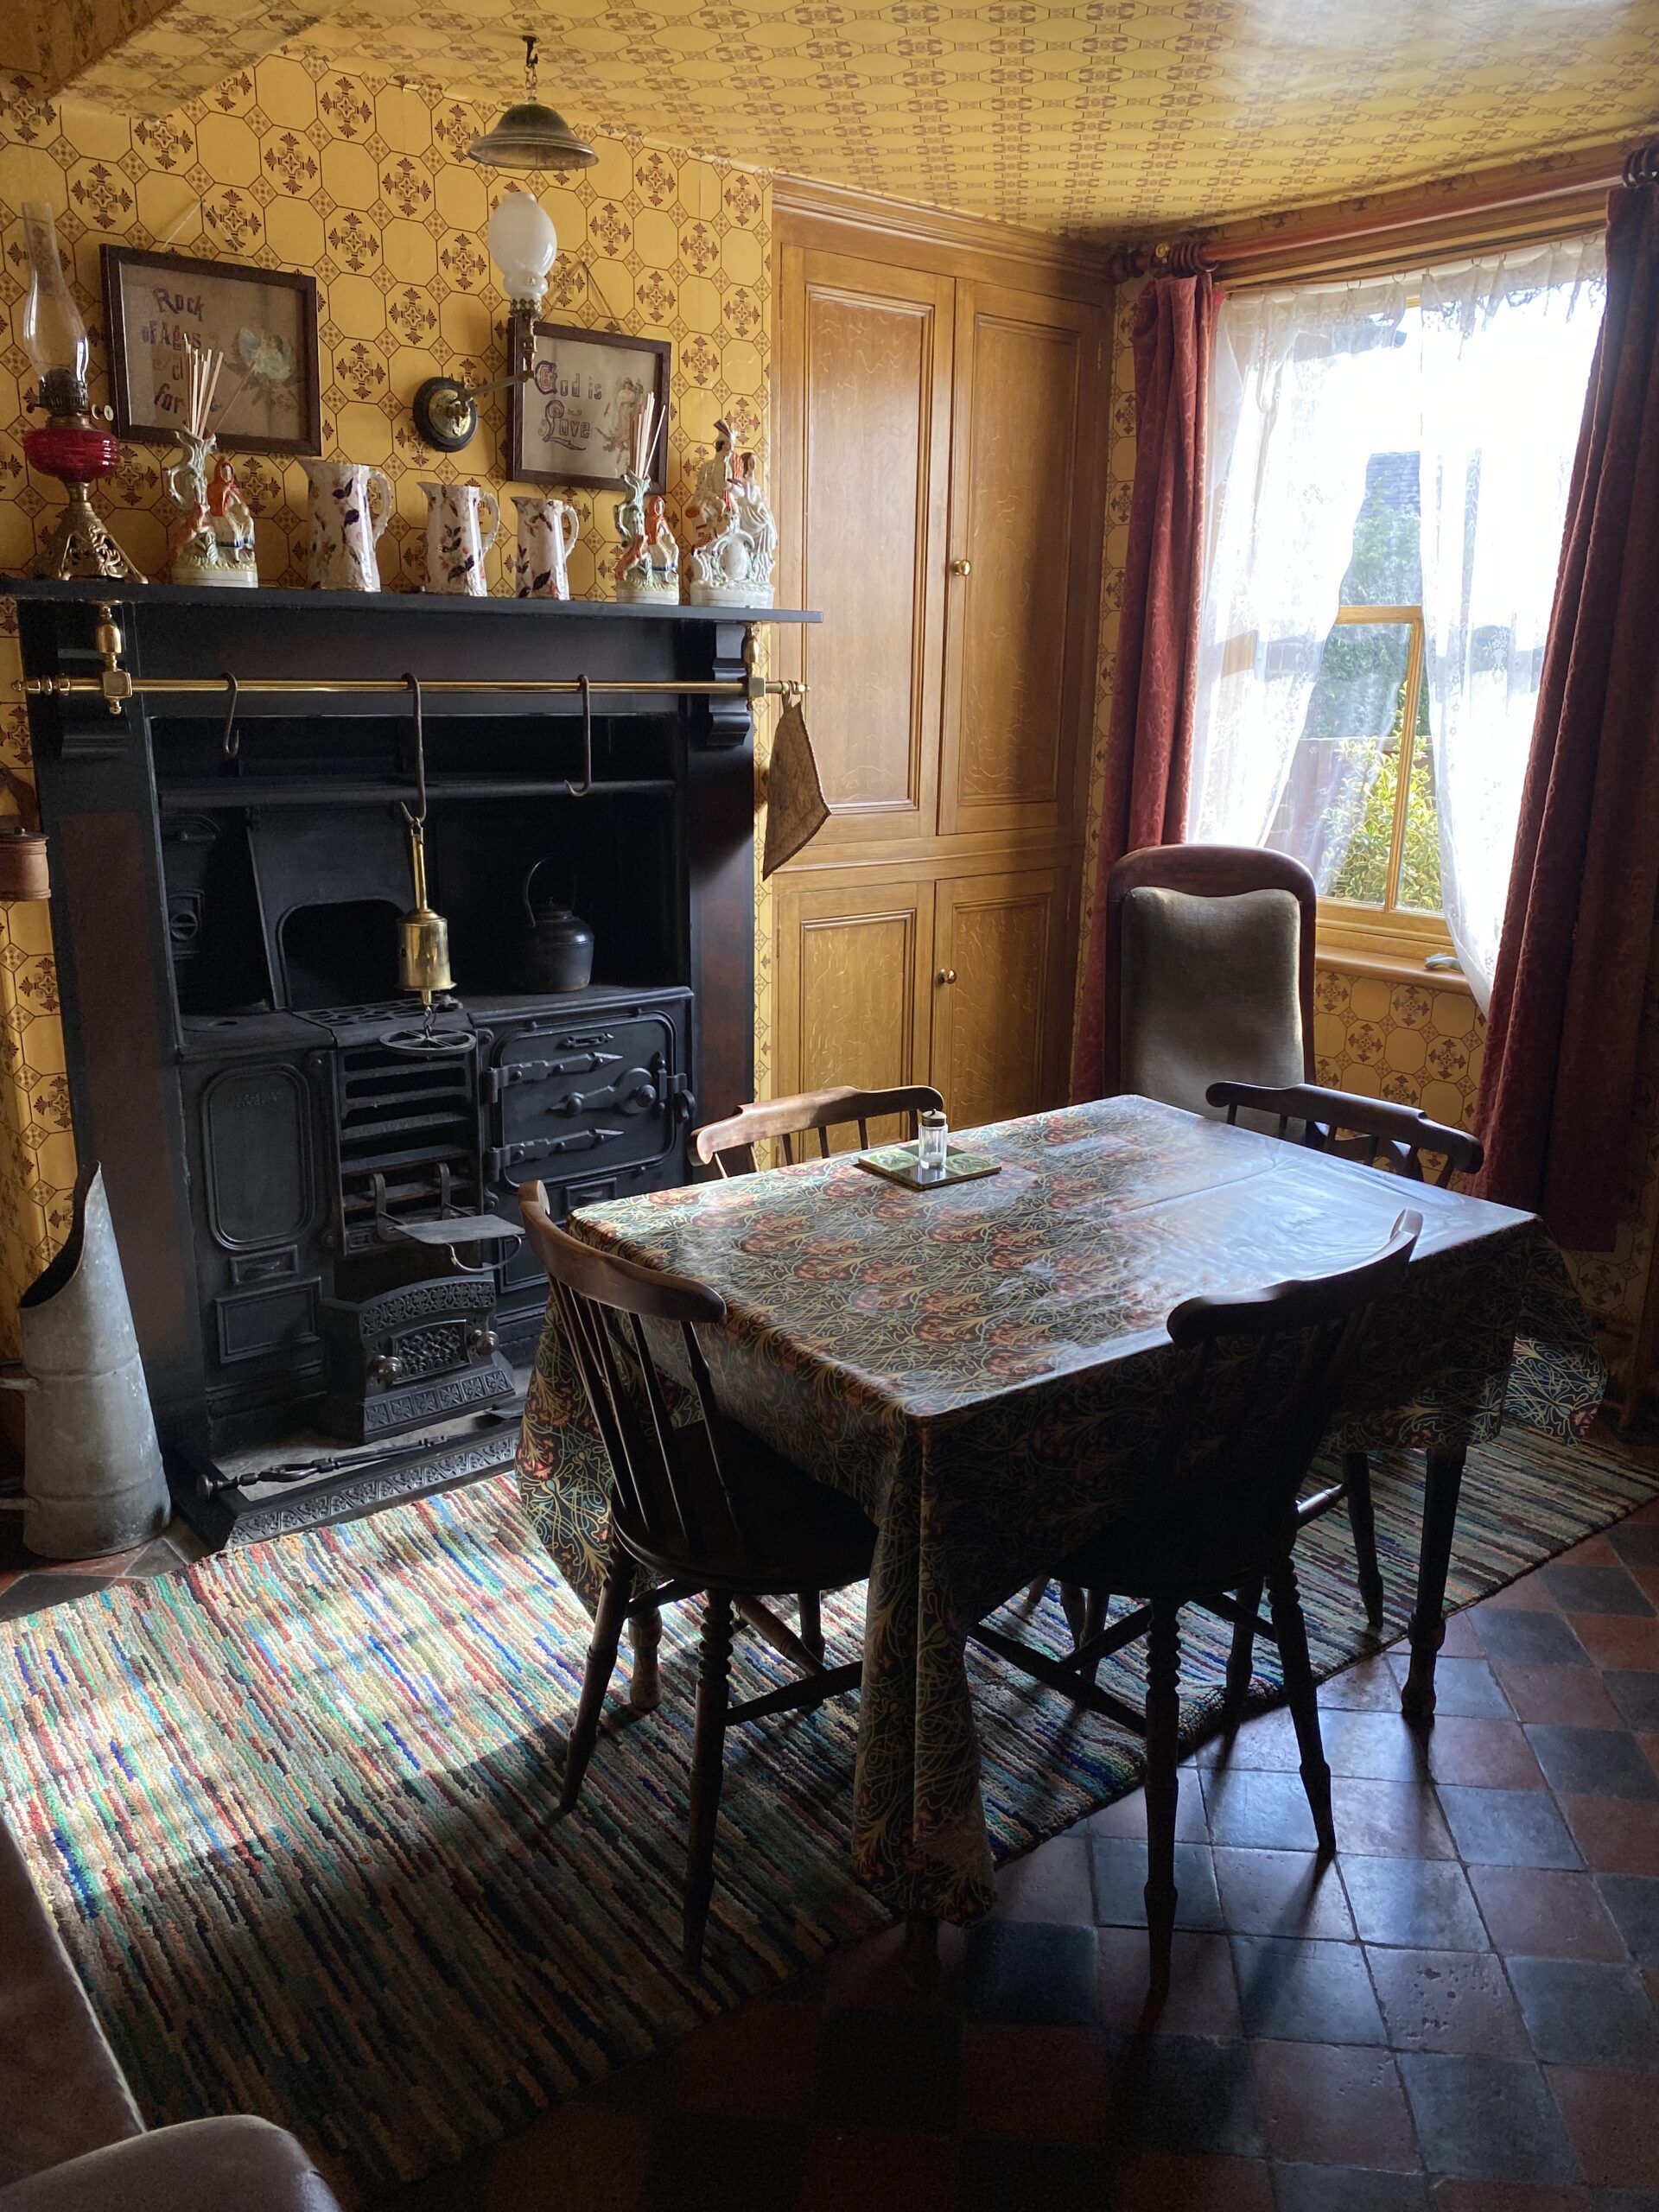 Victorian house tour - kitchen with cast iron range and 1895 sanitary wallpaper